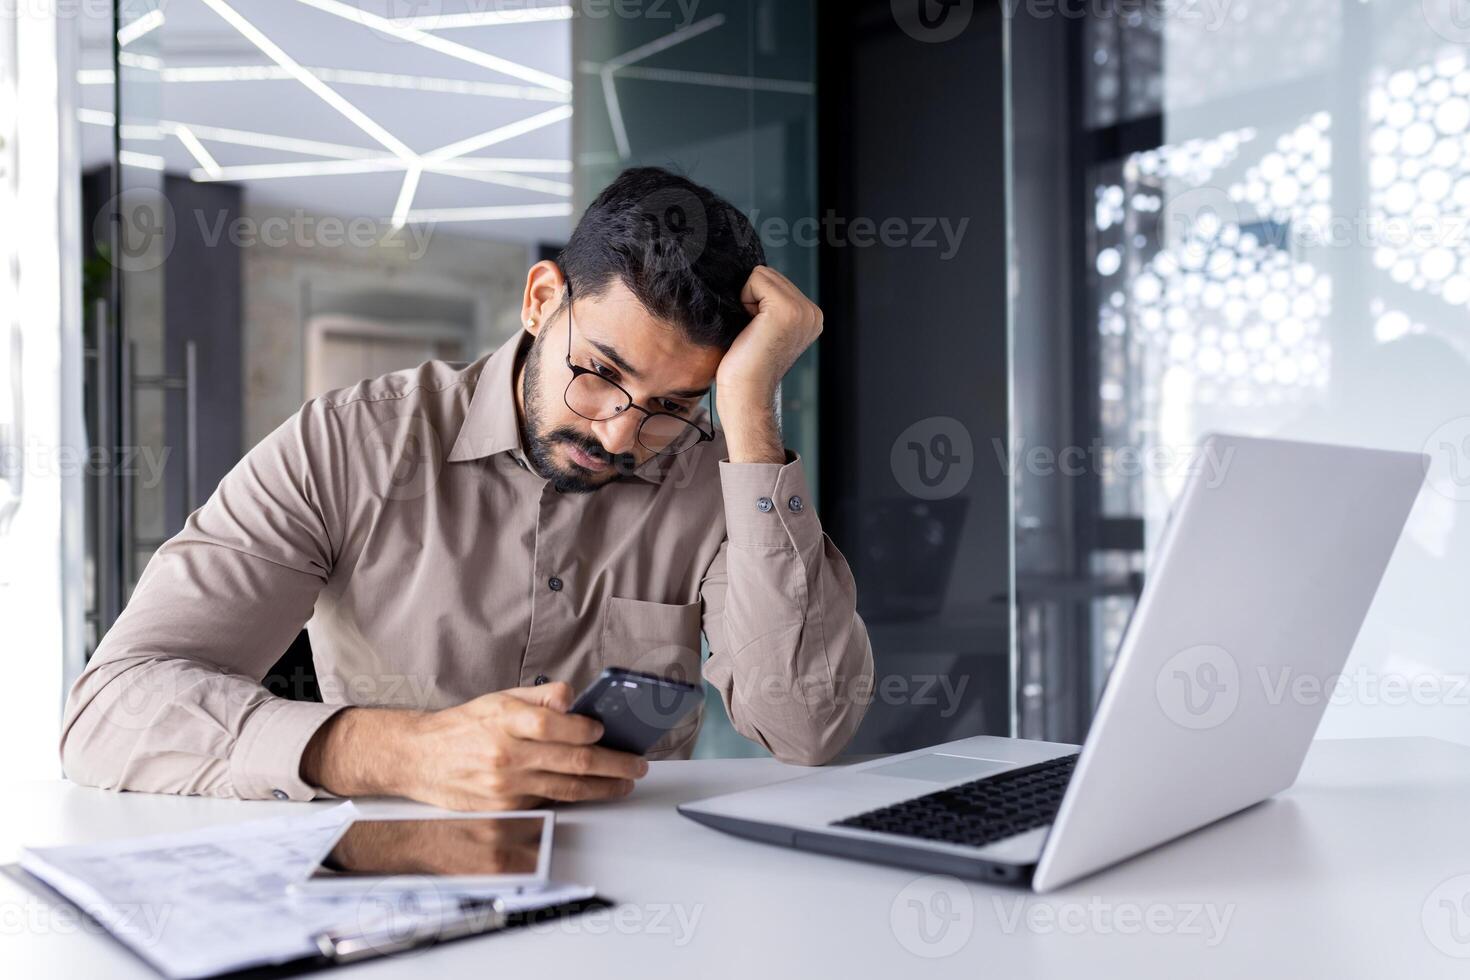 Upset sad man at workplace inside office, businessman uses phone reads bad news received by e-mail, employee disappointed holds smartphone in hands browses internet sites and social networks. photo